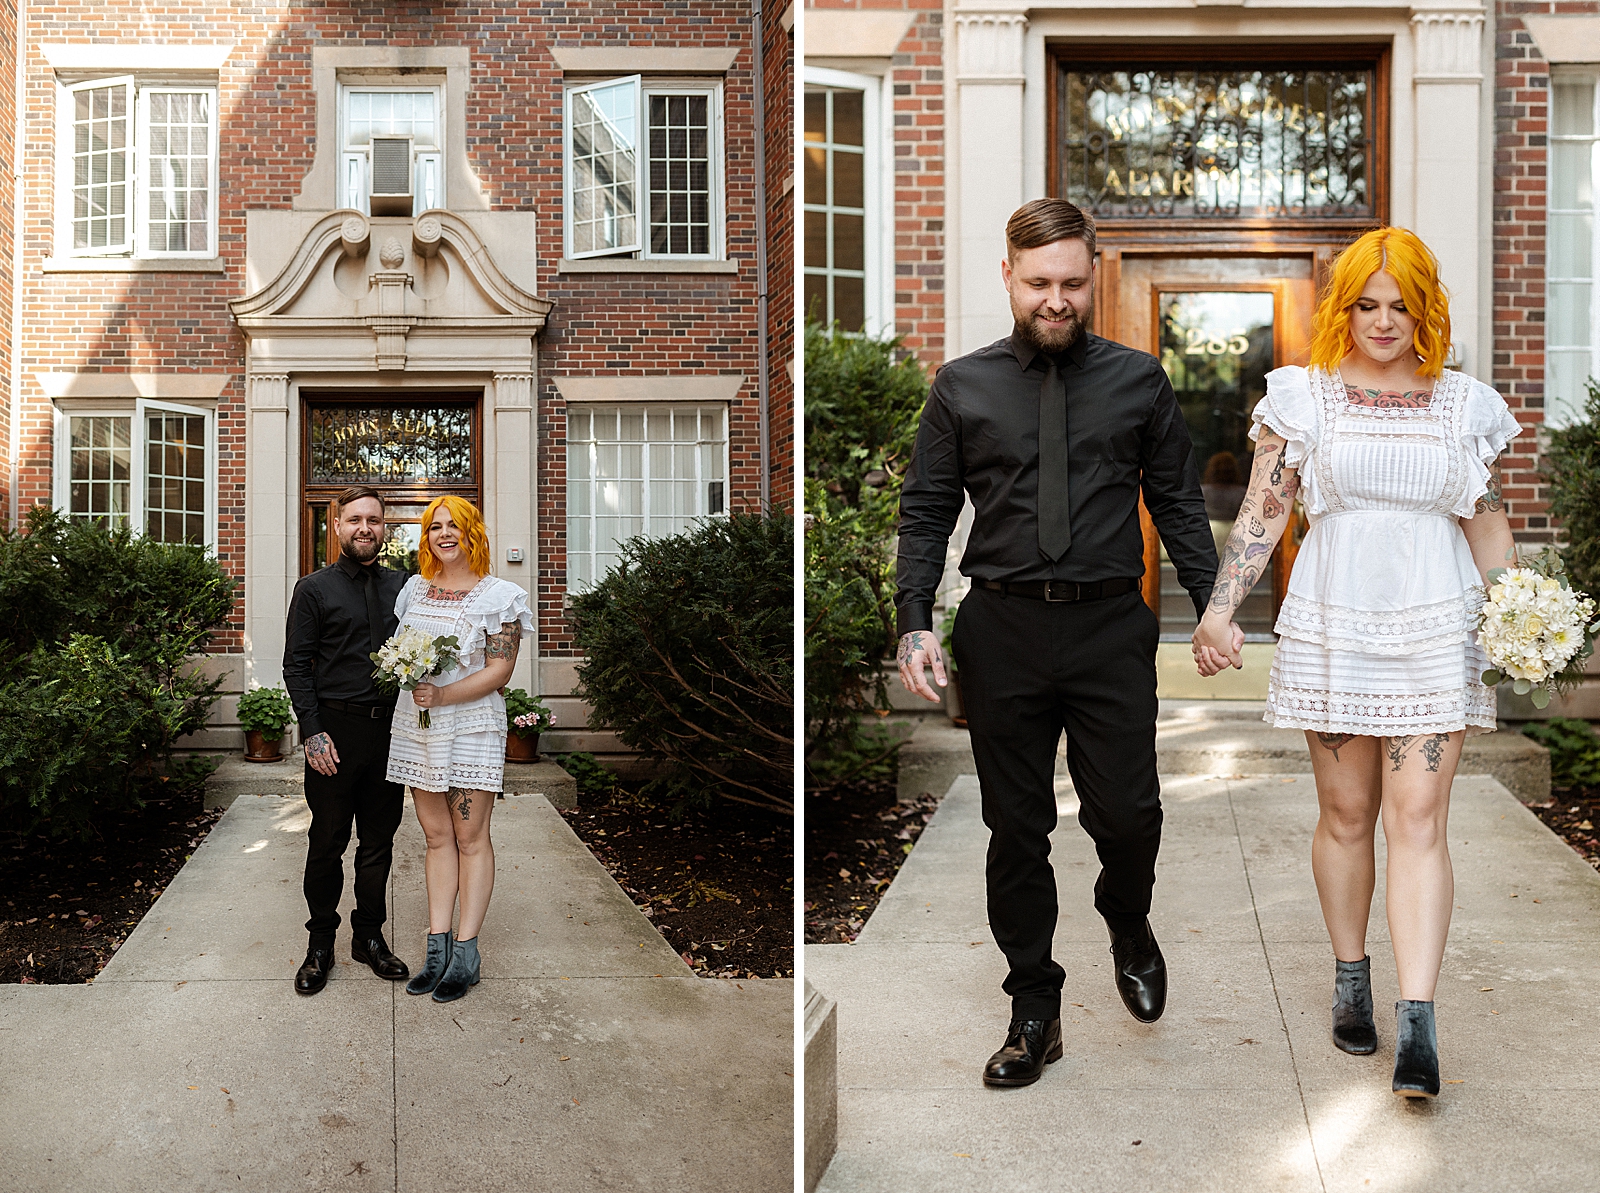 Portraits of Bride and Groom in front of red brick store building